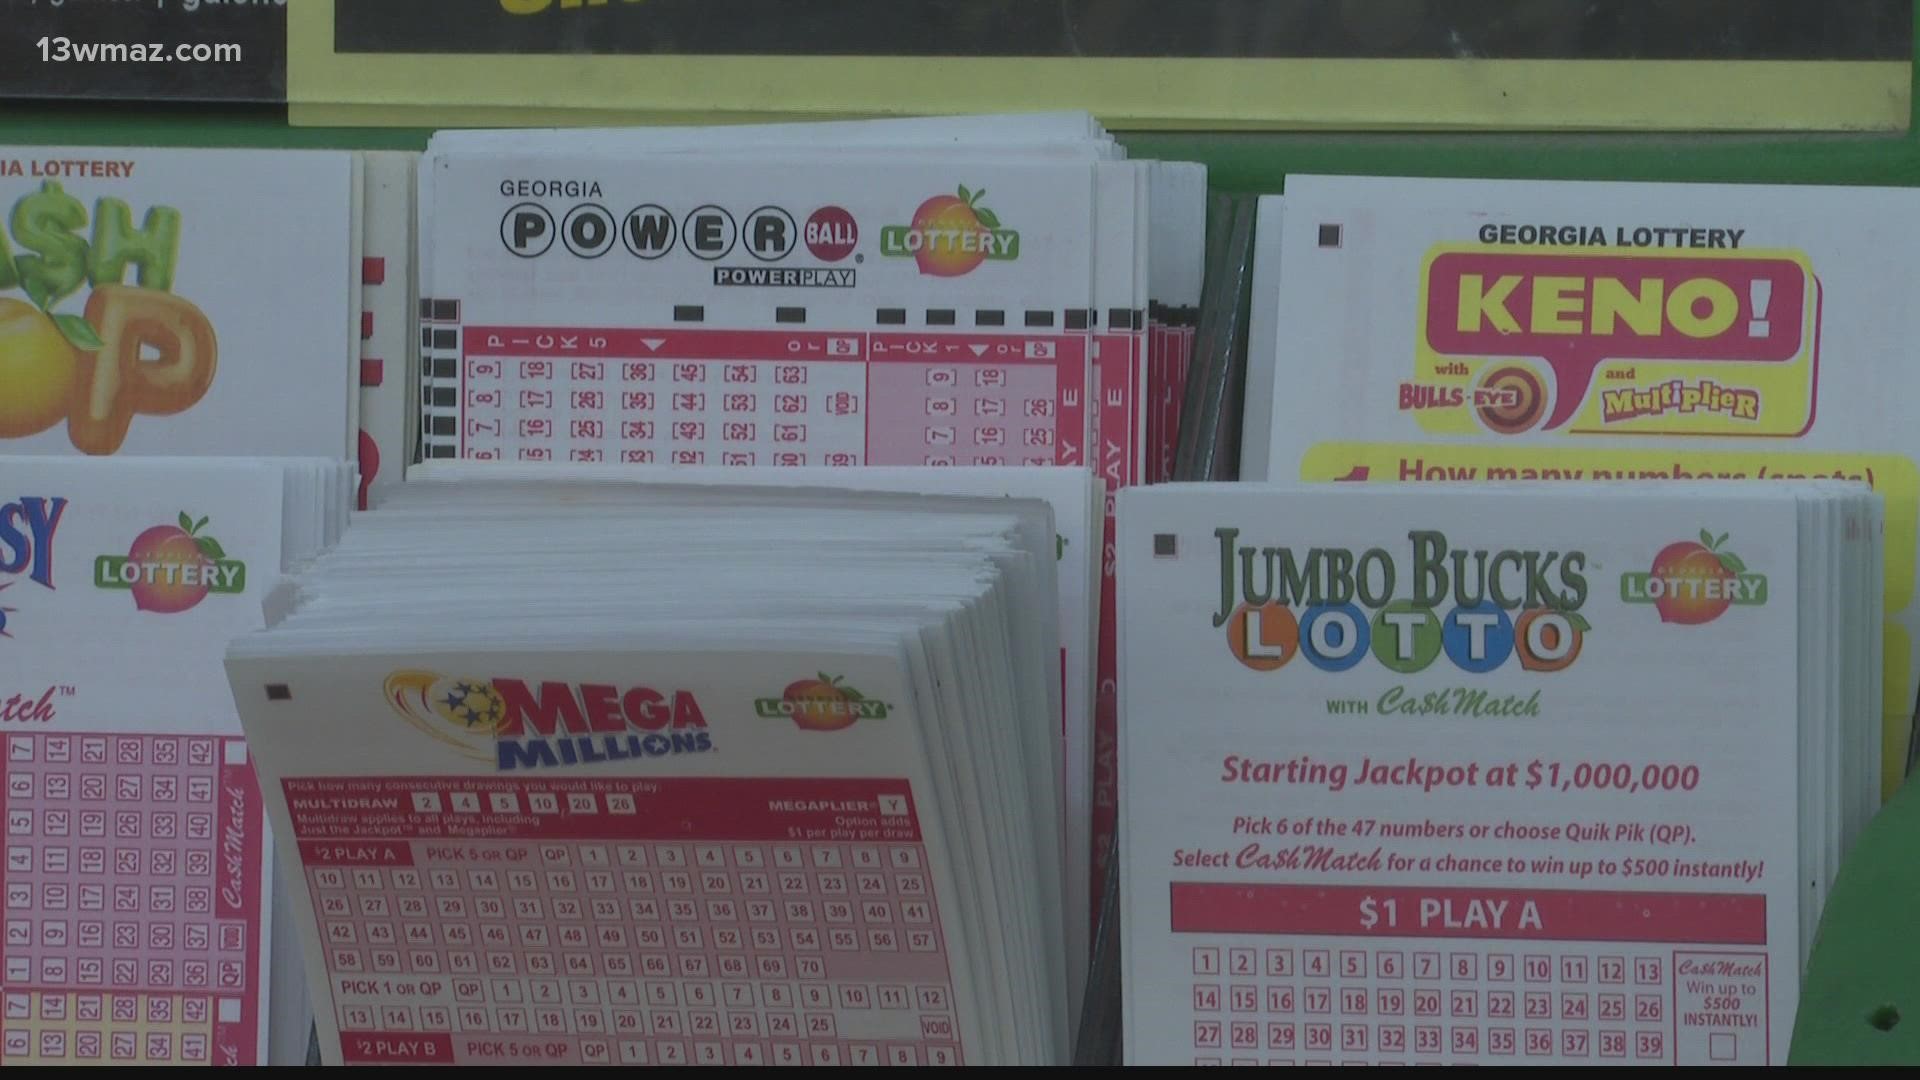 It's only the second time in Powerball's 30-year history the estimated jackpot has been this high